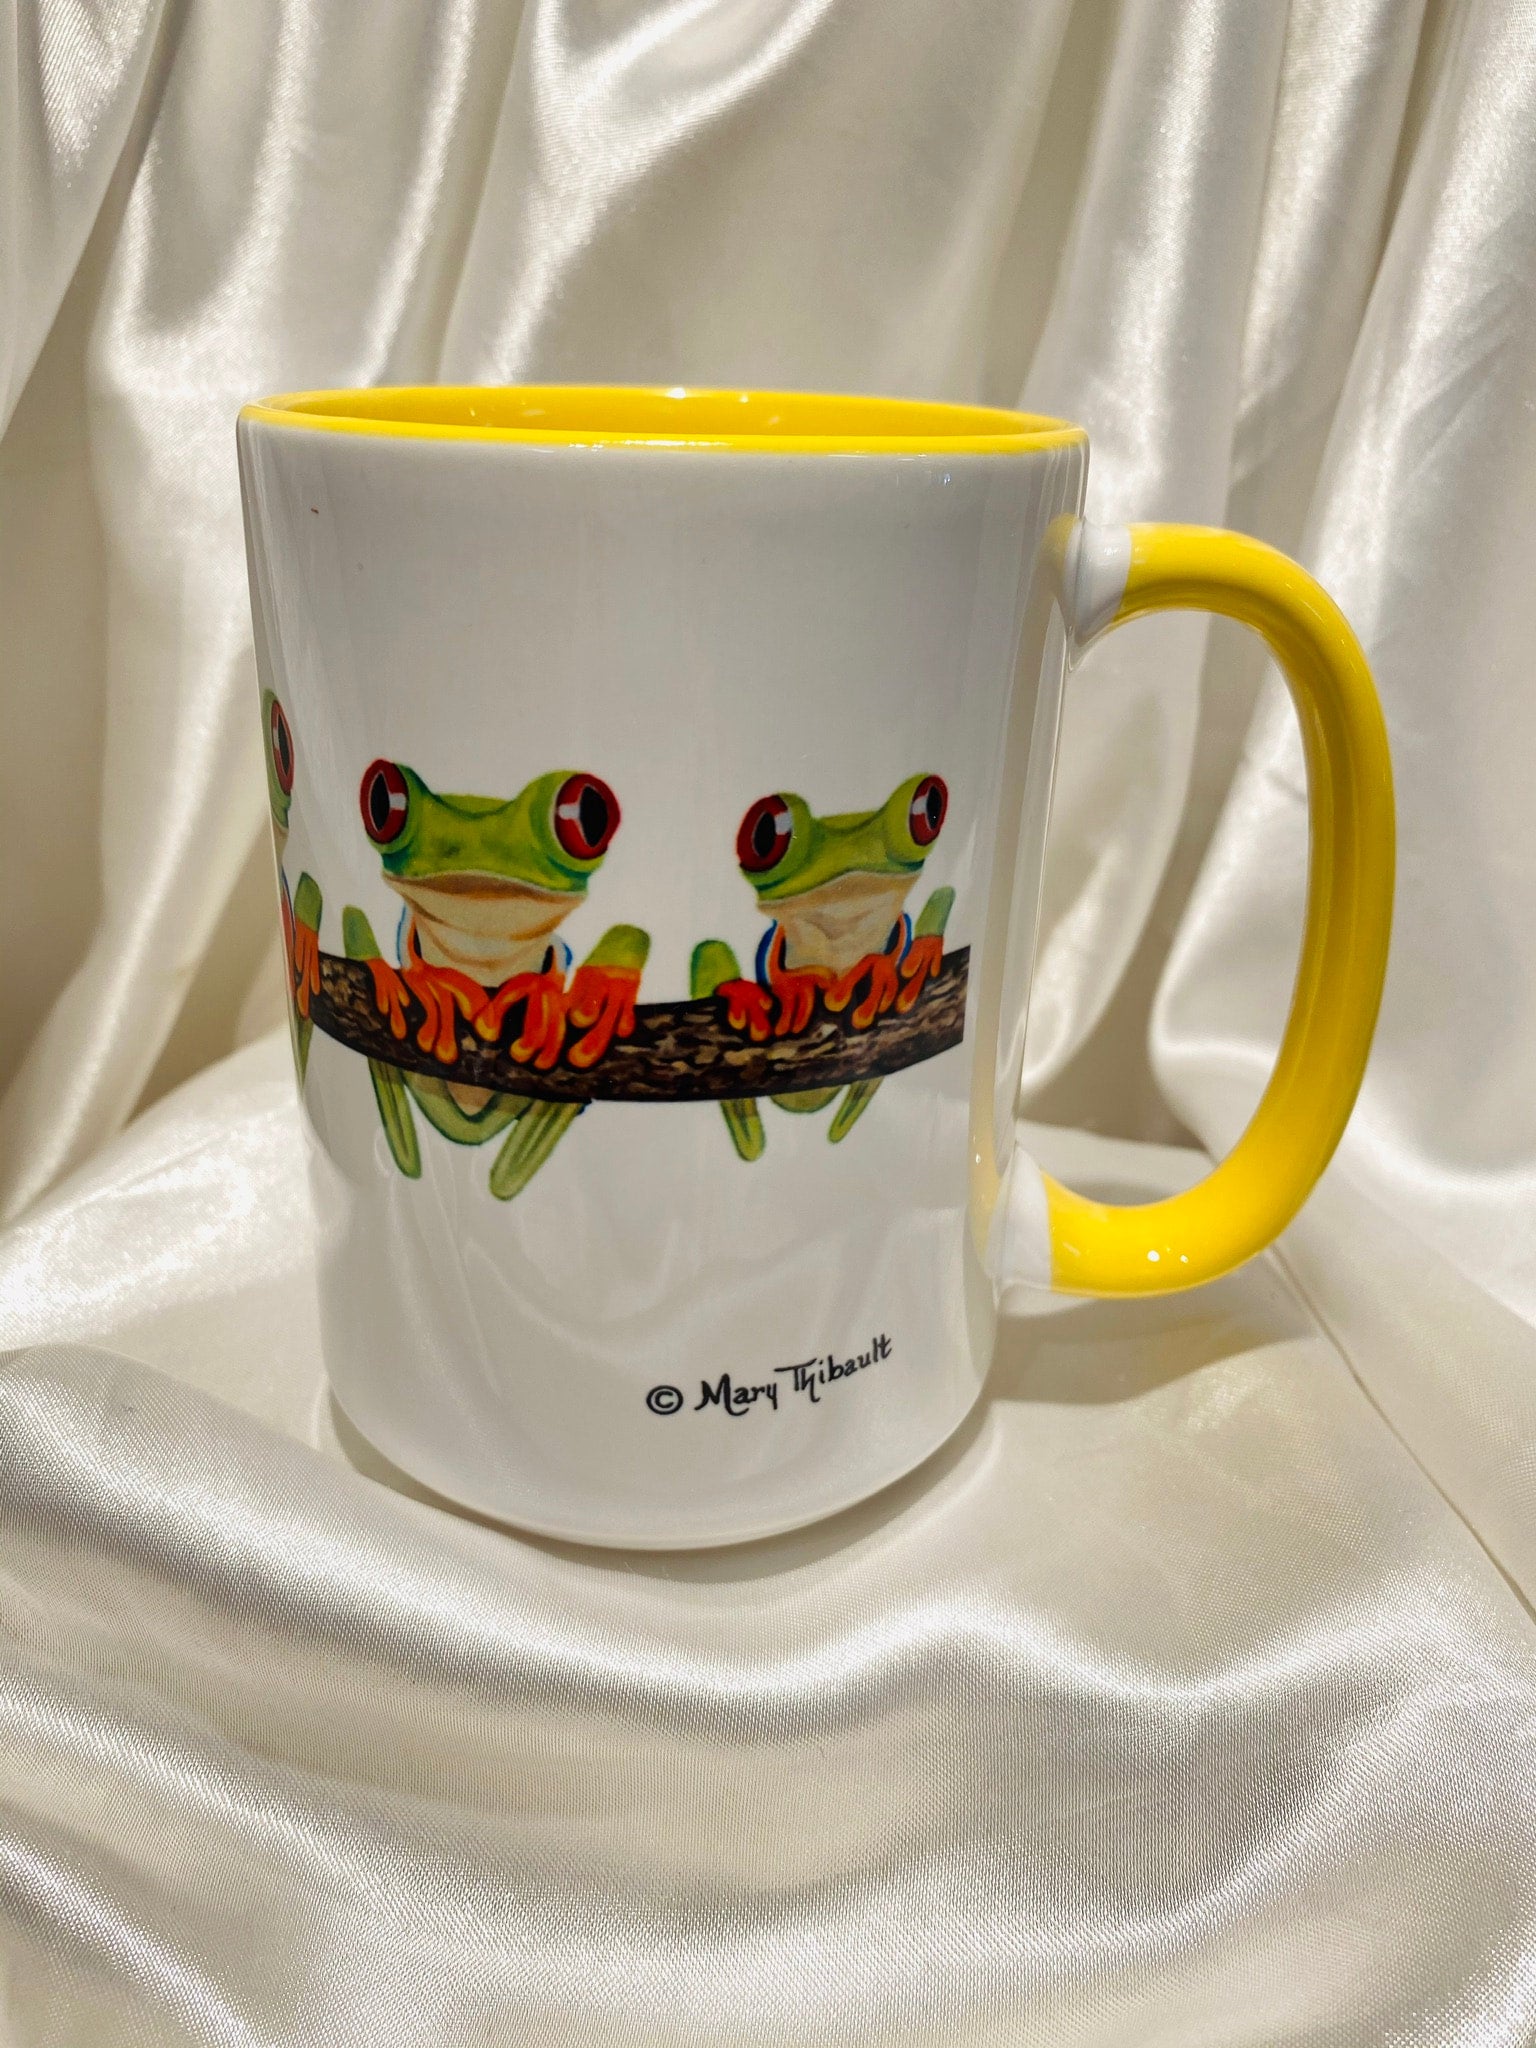 Peaceful Frog Mugs-F.R.O.G.Forever Rely On God